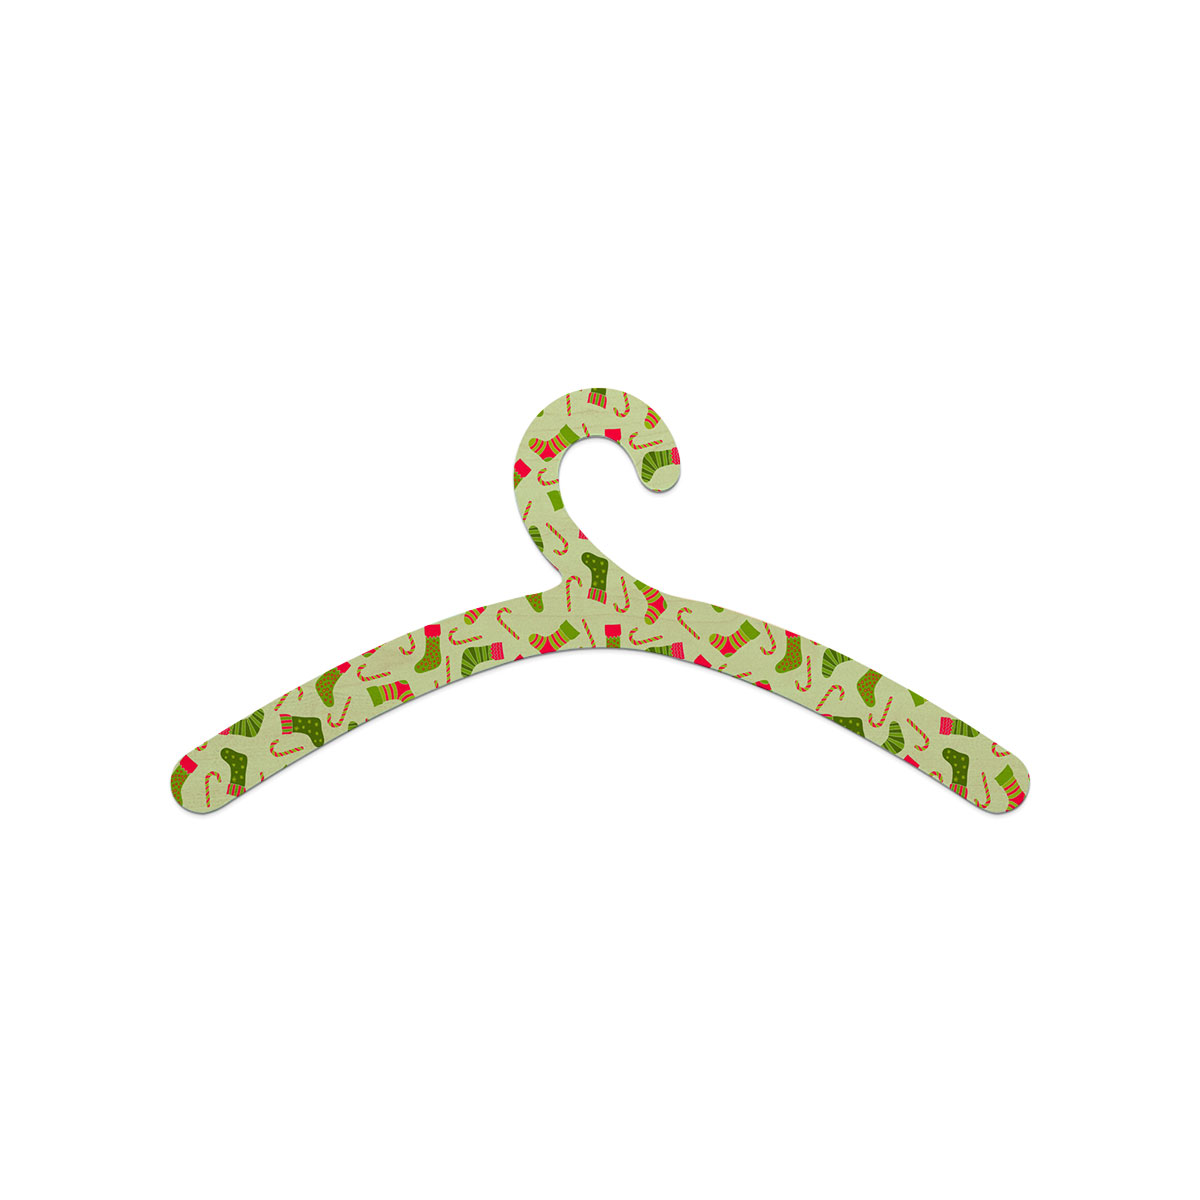 Christmas Socks, Colorful Socks And Candy Canes Wooden Hanger